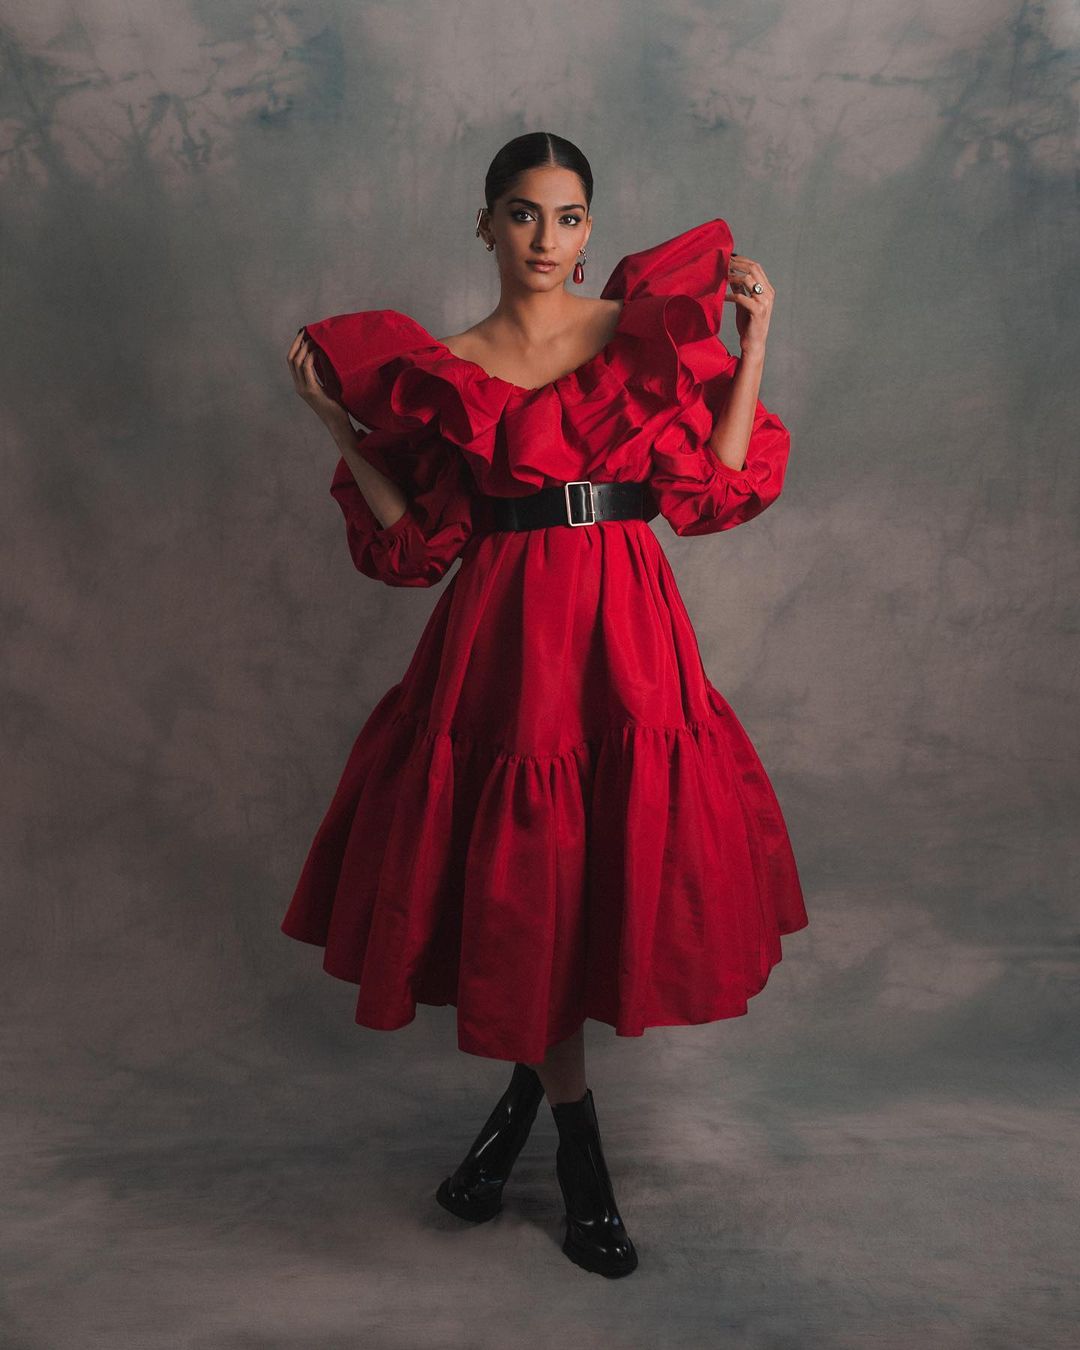 Sonam Kapoor Vogue Cover Shoot July 2021, Wears the extraordinary gown from  Versace and Dolce&Gabbana